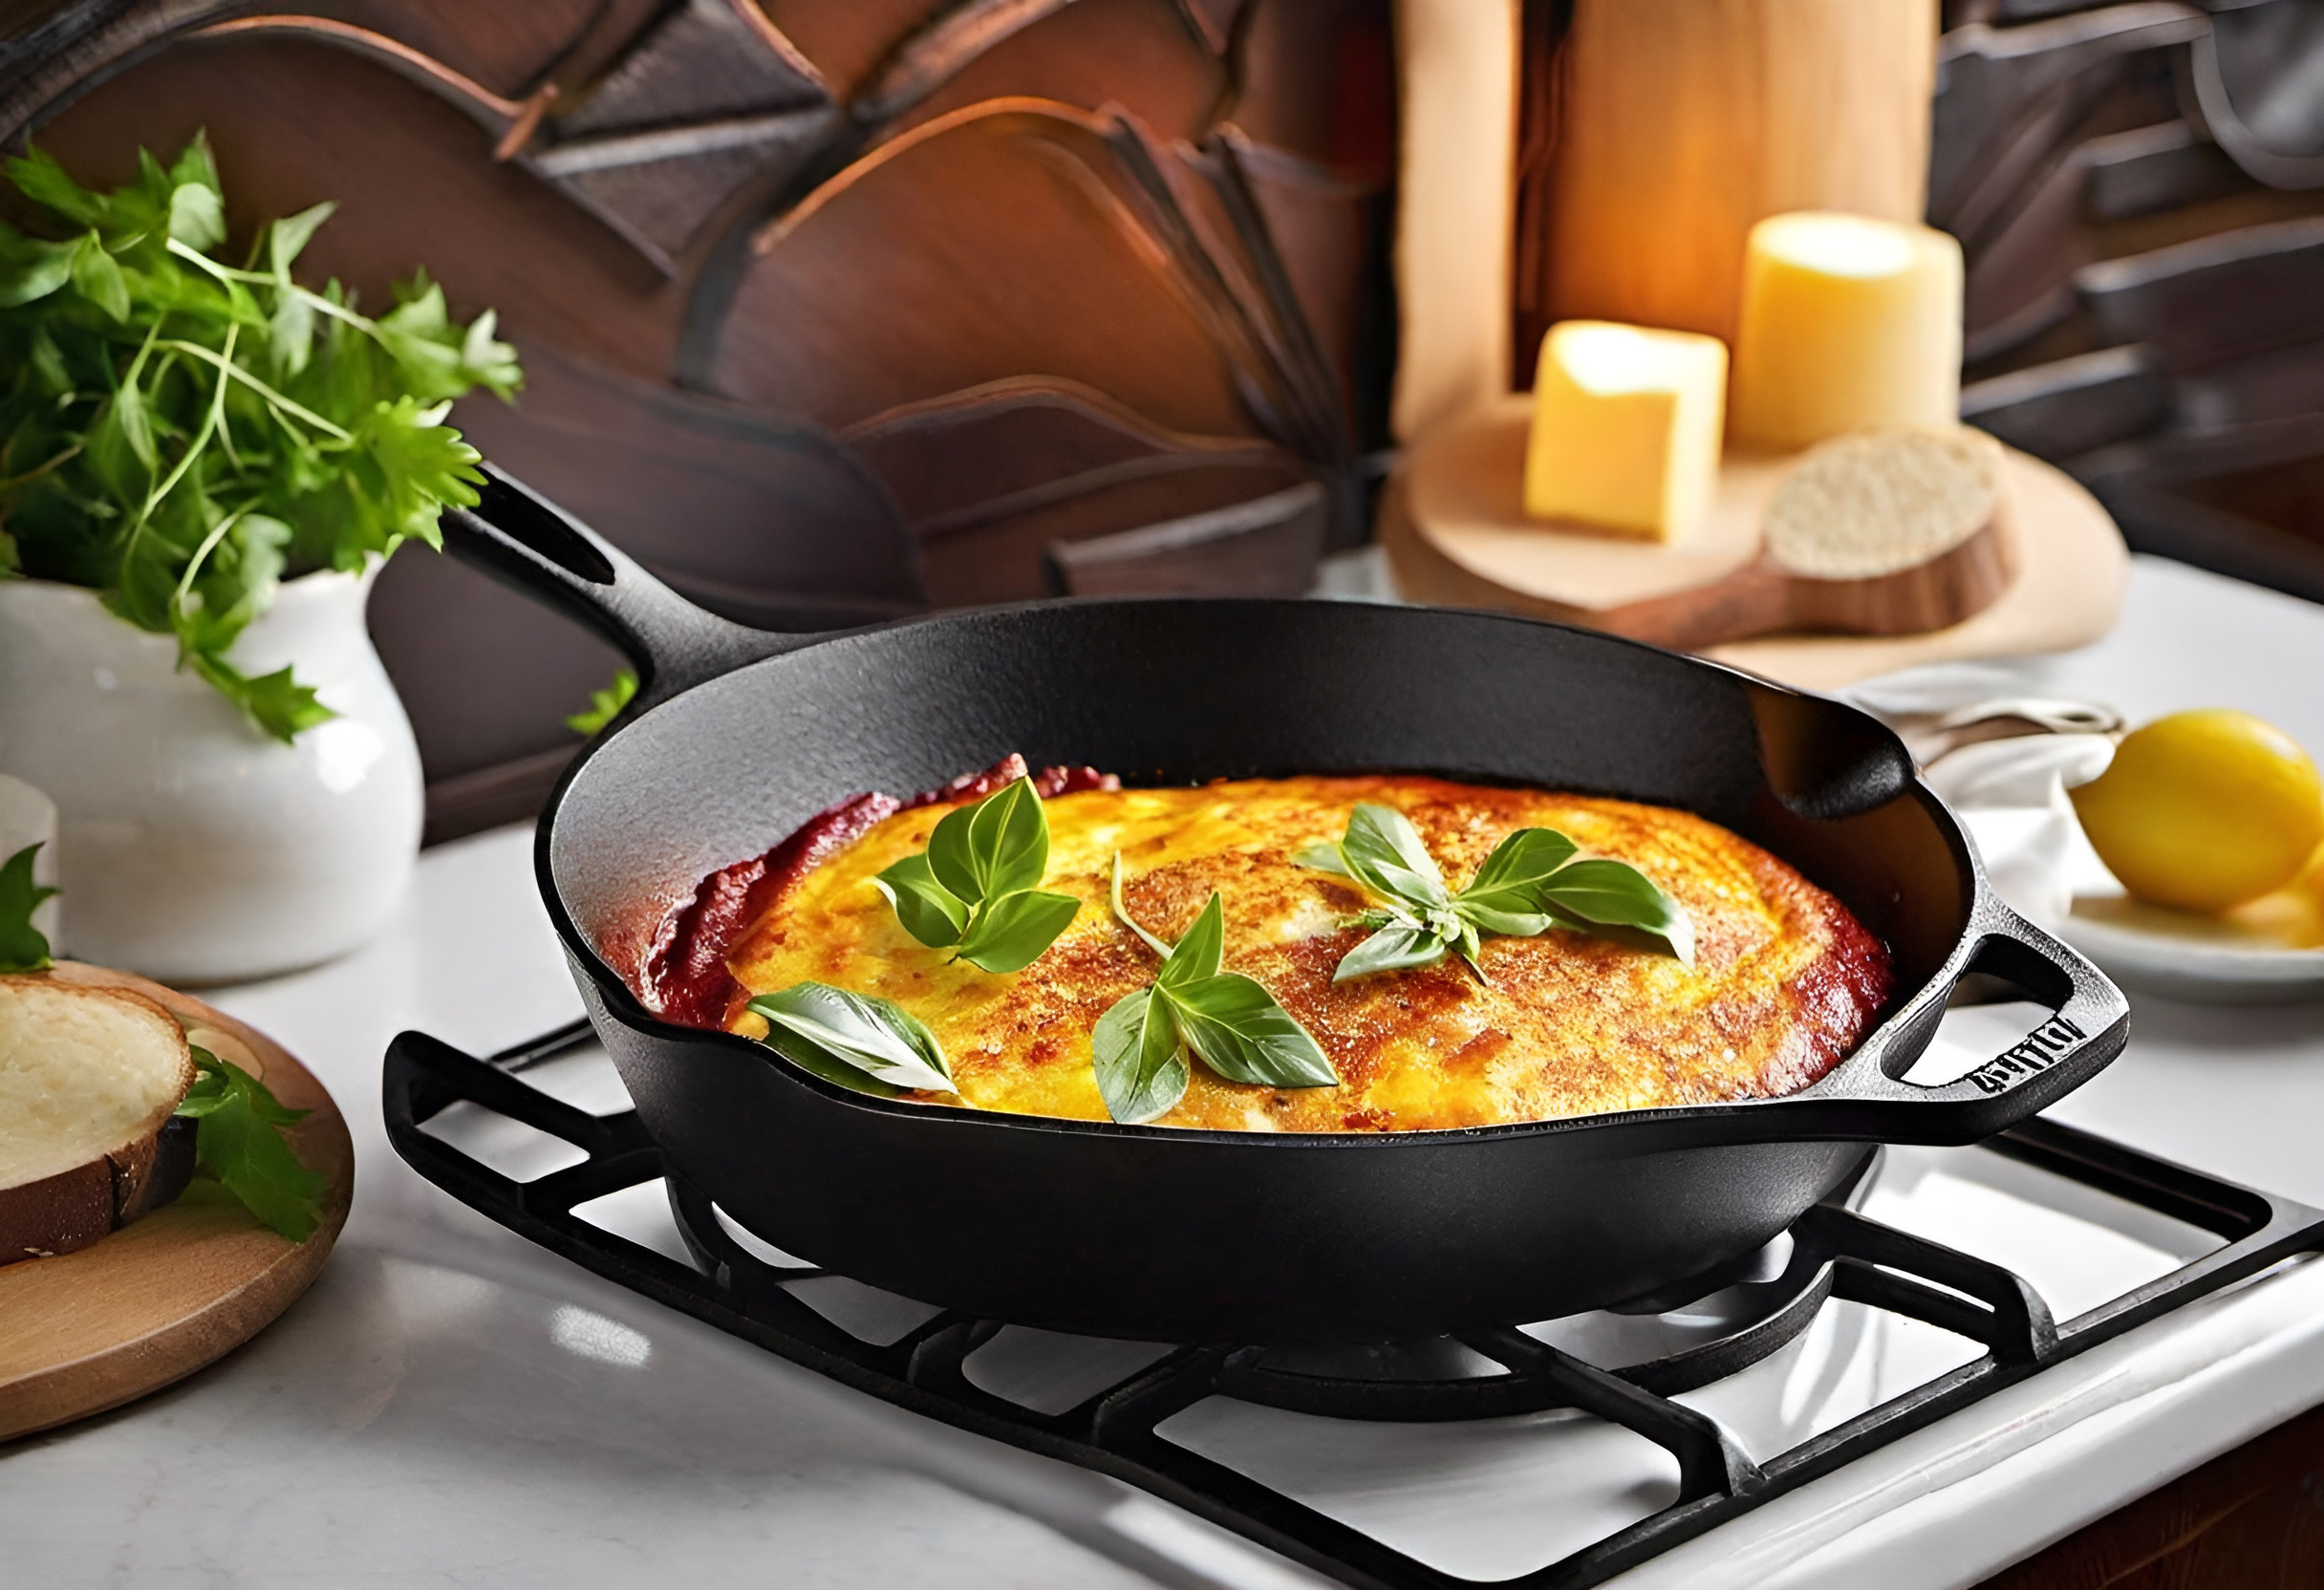 The Durability and Longevity of Cast Iron Pans